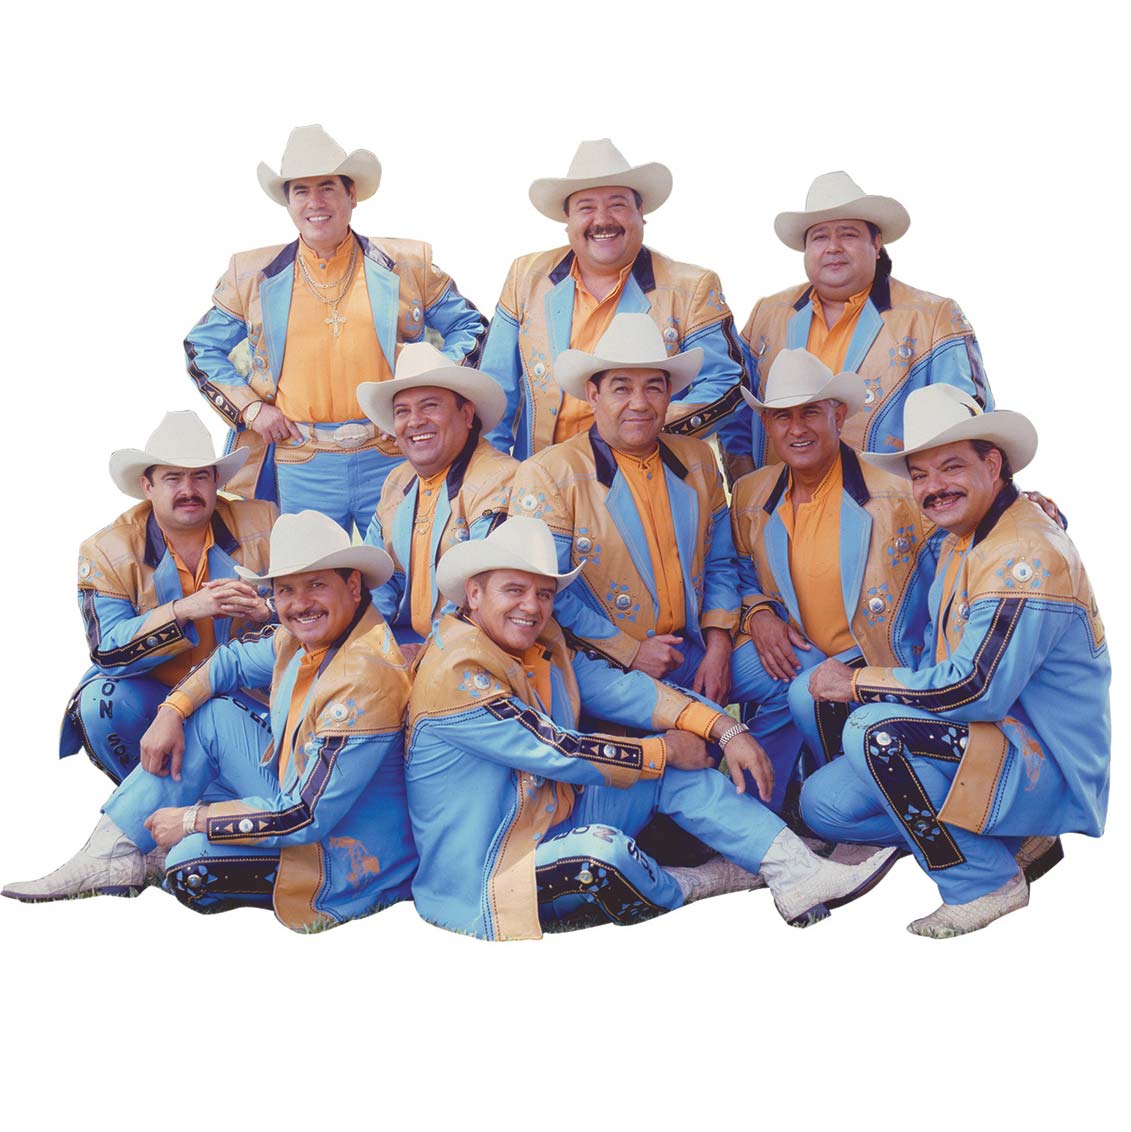 Featured image for “Grupo Laberinto”